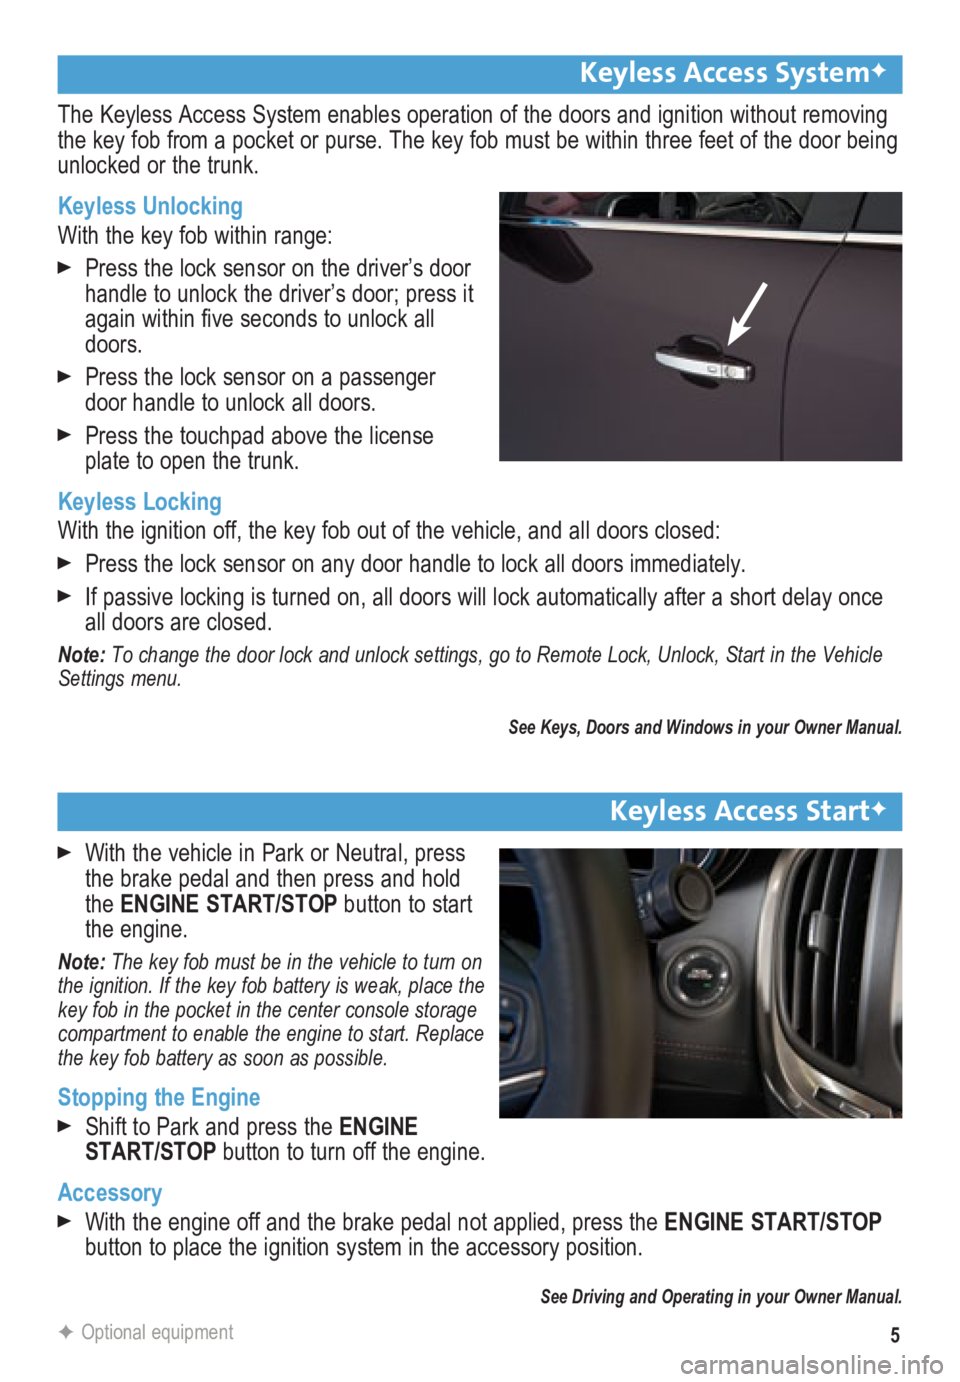 BUICK LACROSSE 2014  Get To Know Guide 5
Keyless Access SystemF 
The Keyless Access System enables operation of the doors and ignition wi\
thout removing 
the key fob from a pocket or purse. The key fob must be within three fee\
t of the d